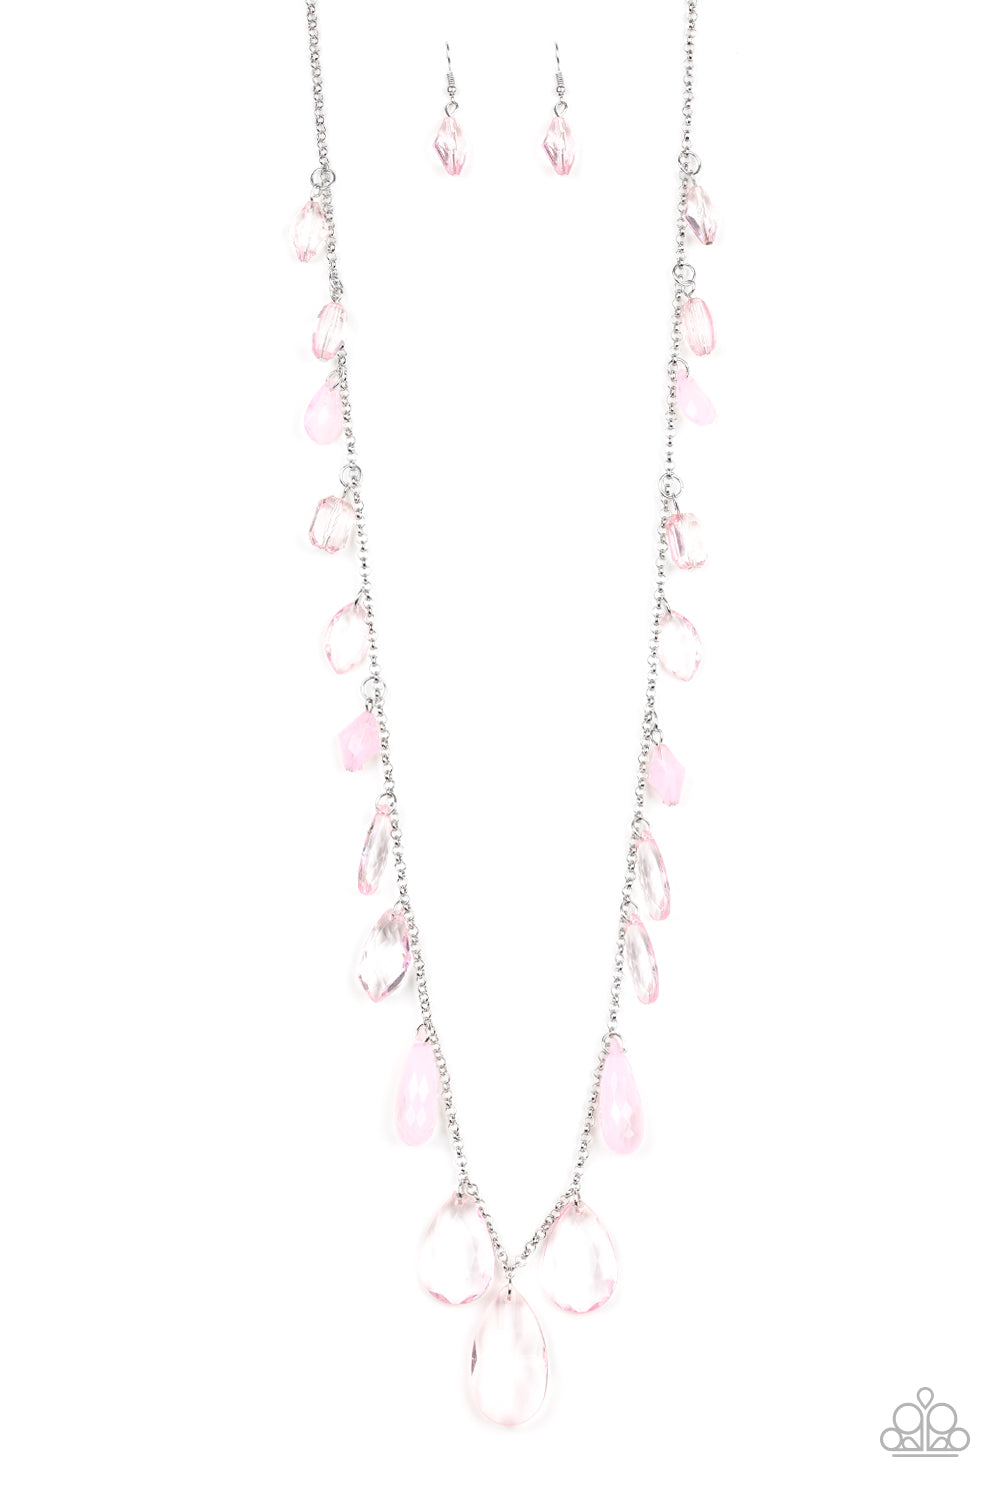 GLOW And Steady Wins The Race - Pink Necklace Set - Princess Glam Shop